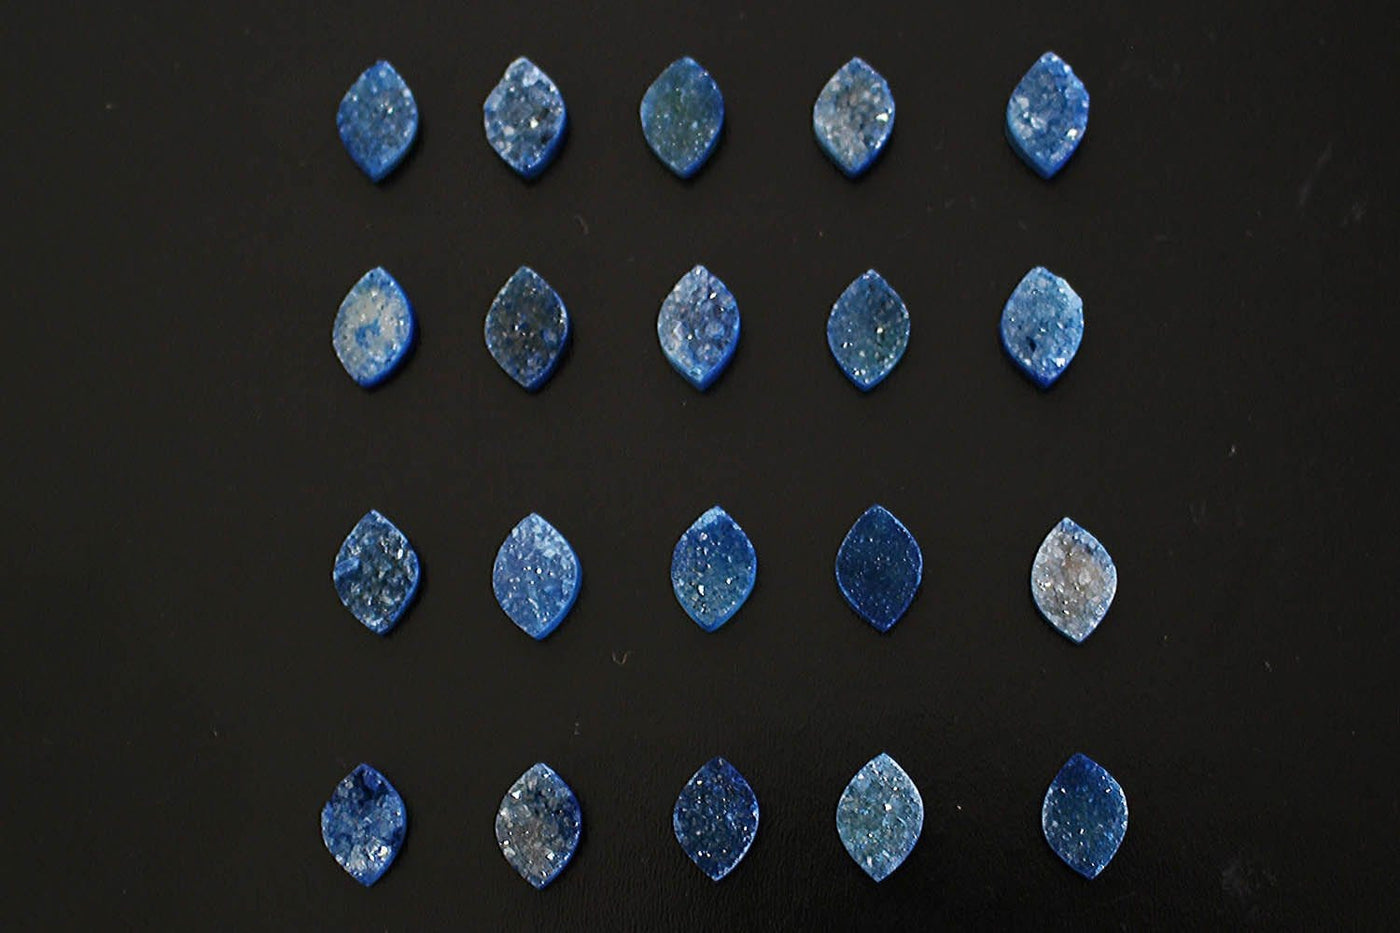 Cabochon - Blue Marquise Druzy Cabochon - Colorful Druzy Stone - in 4 rows